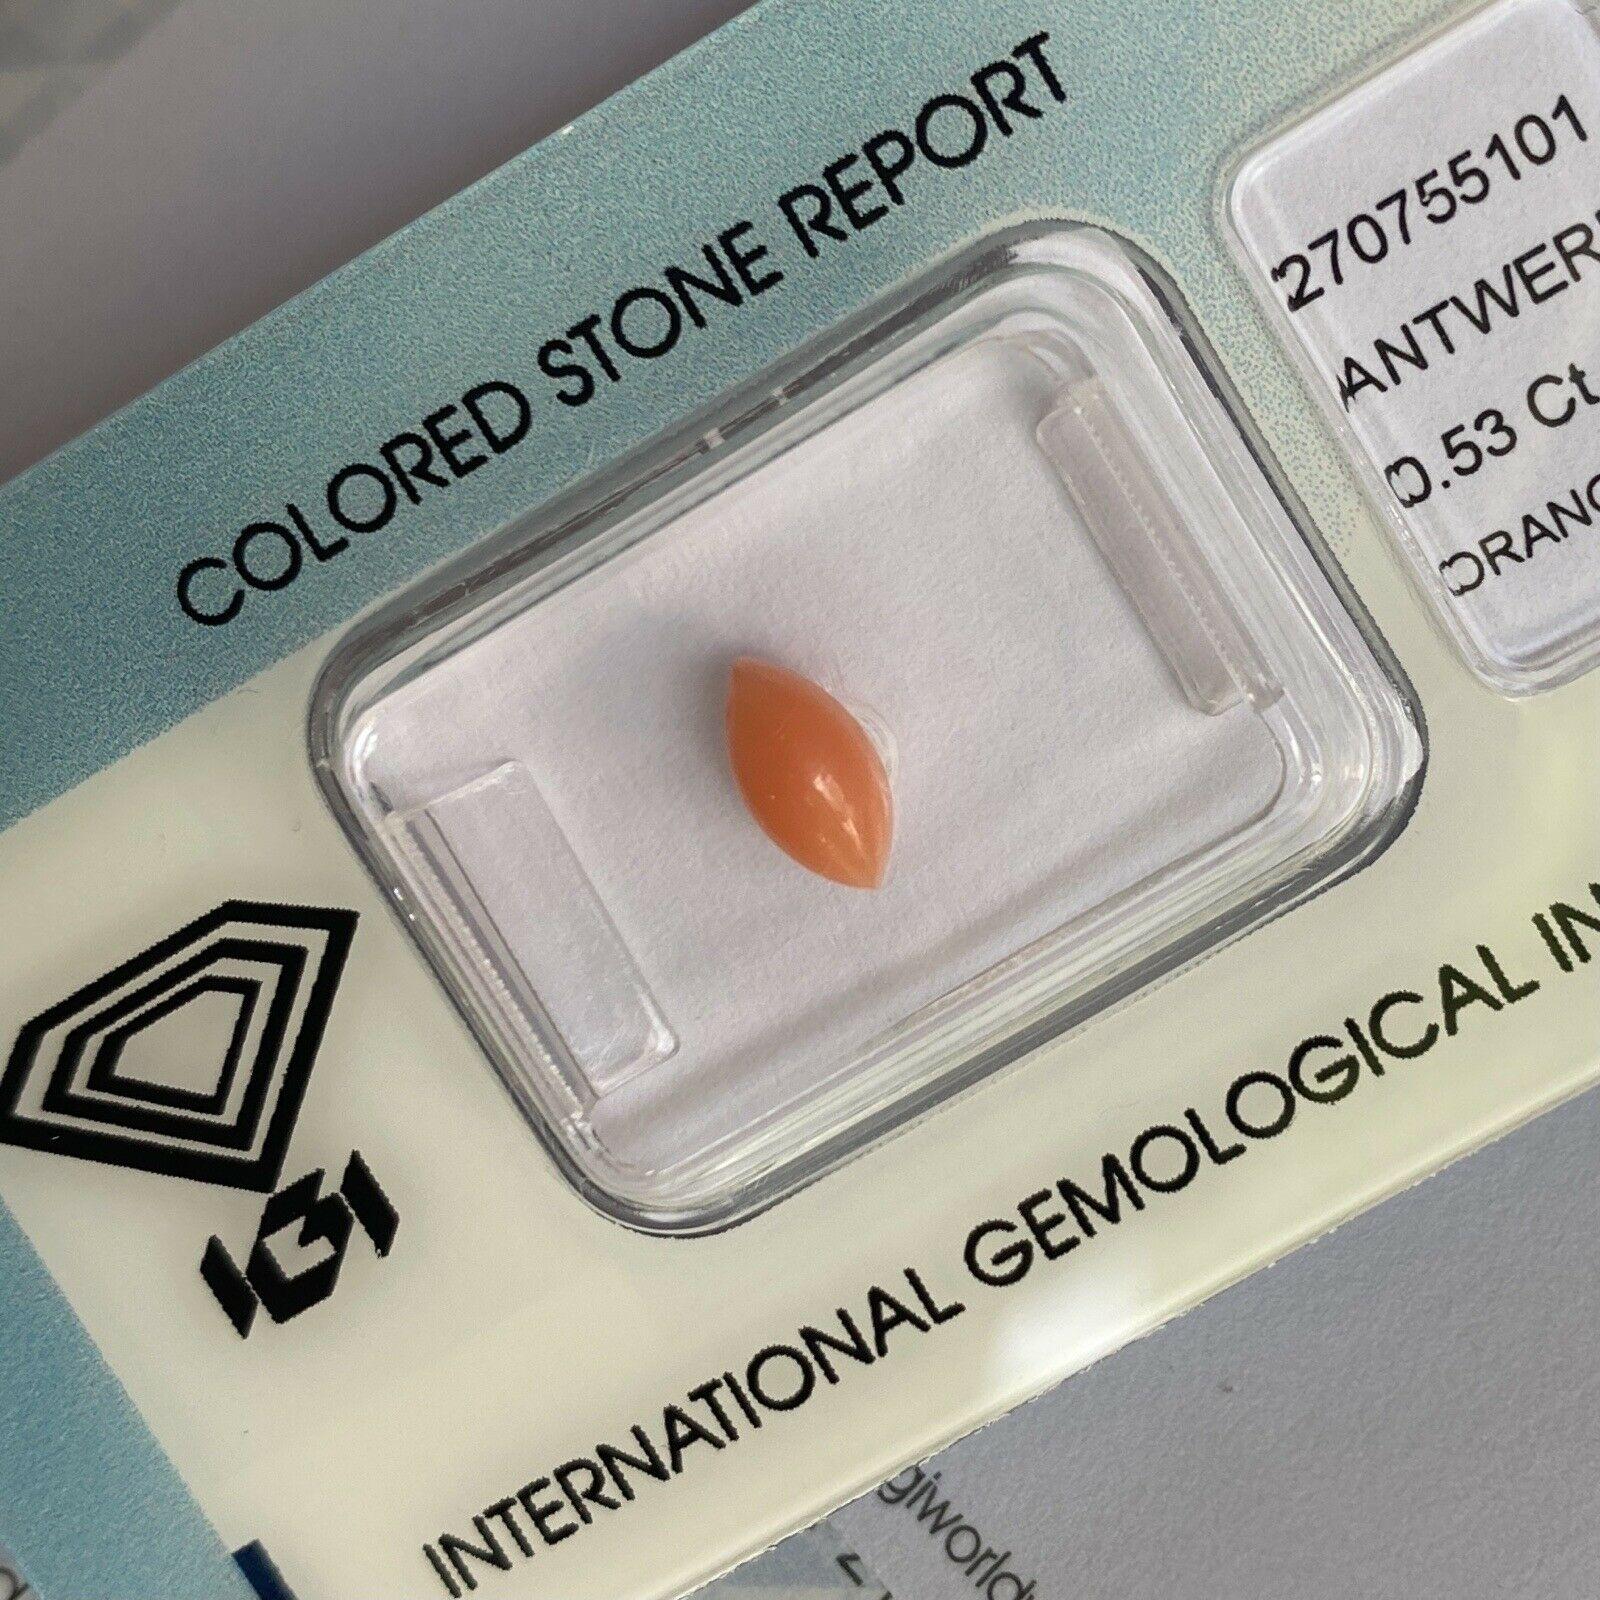 Rare Natural Orange Pink Untreated Coral 0.53ct Marquise Cabochon IGI Certified

Natural Pink Orange Coral Gem.
0.53 Carat with an excellent marquise cabochon cut.
This is a fine piece of natural, untreated coral with beautiful orange pink